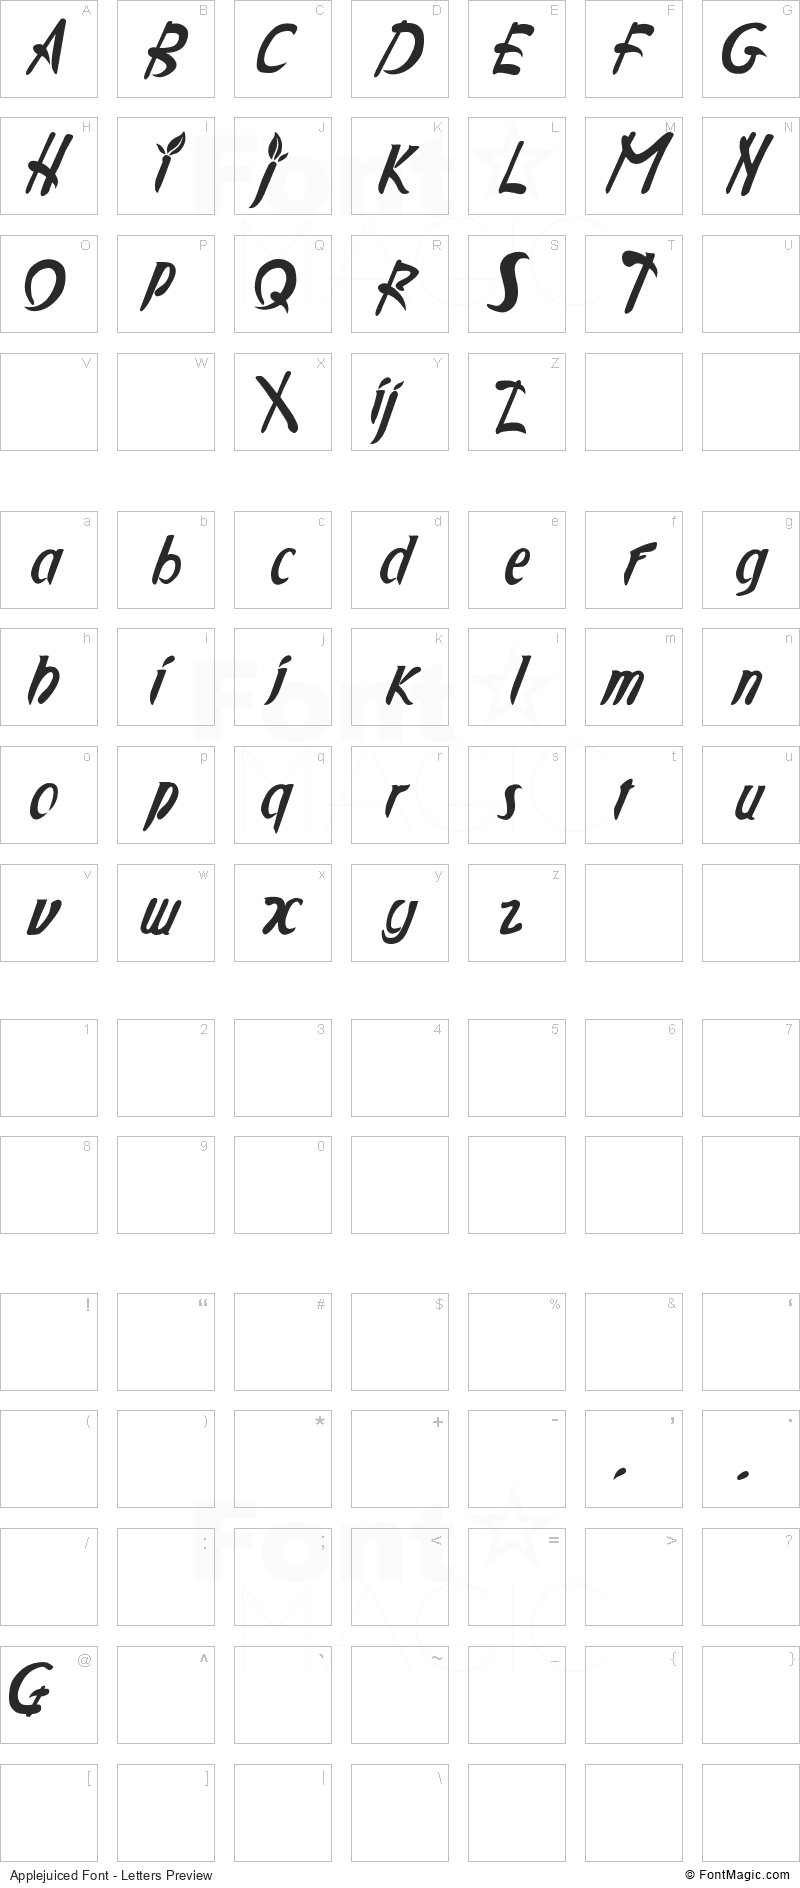 Applejuiced Font - All Latters Preview Chart